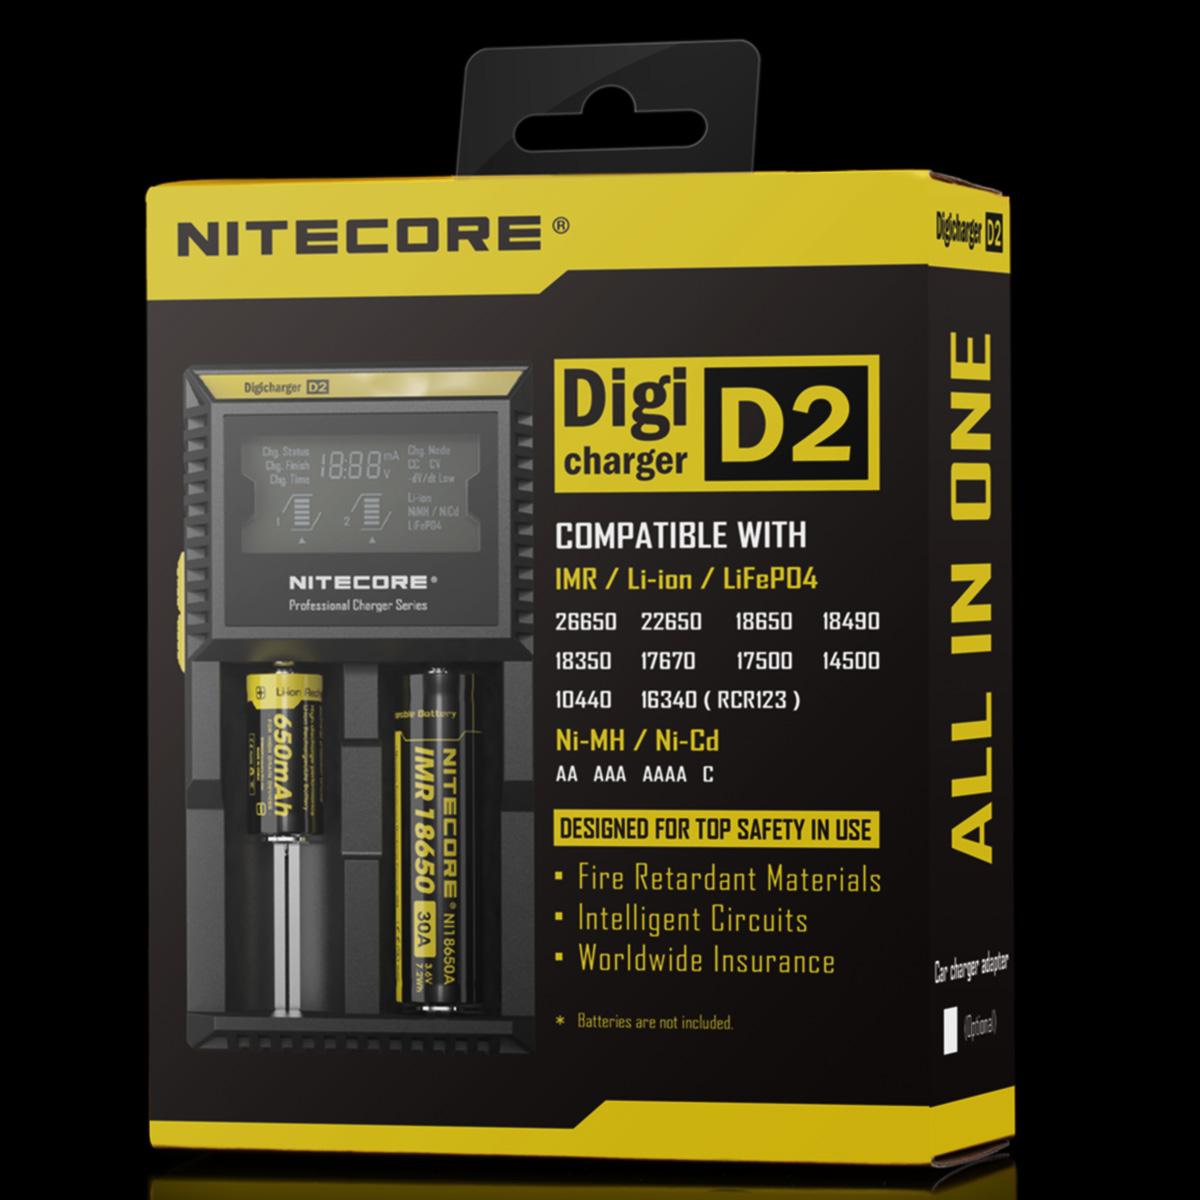 Nitecore D2 charger for 18650 batteries Ireland